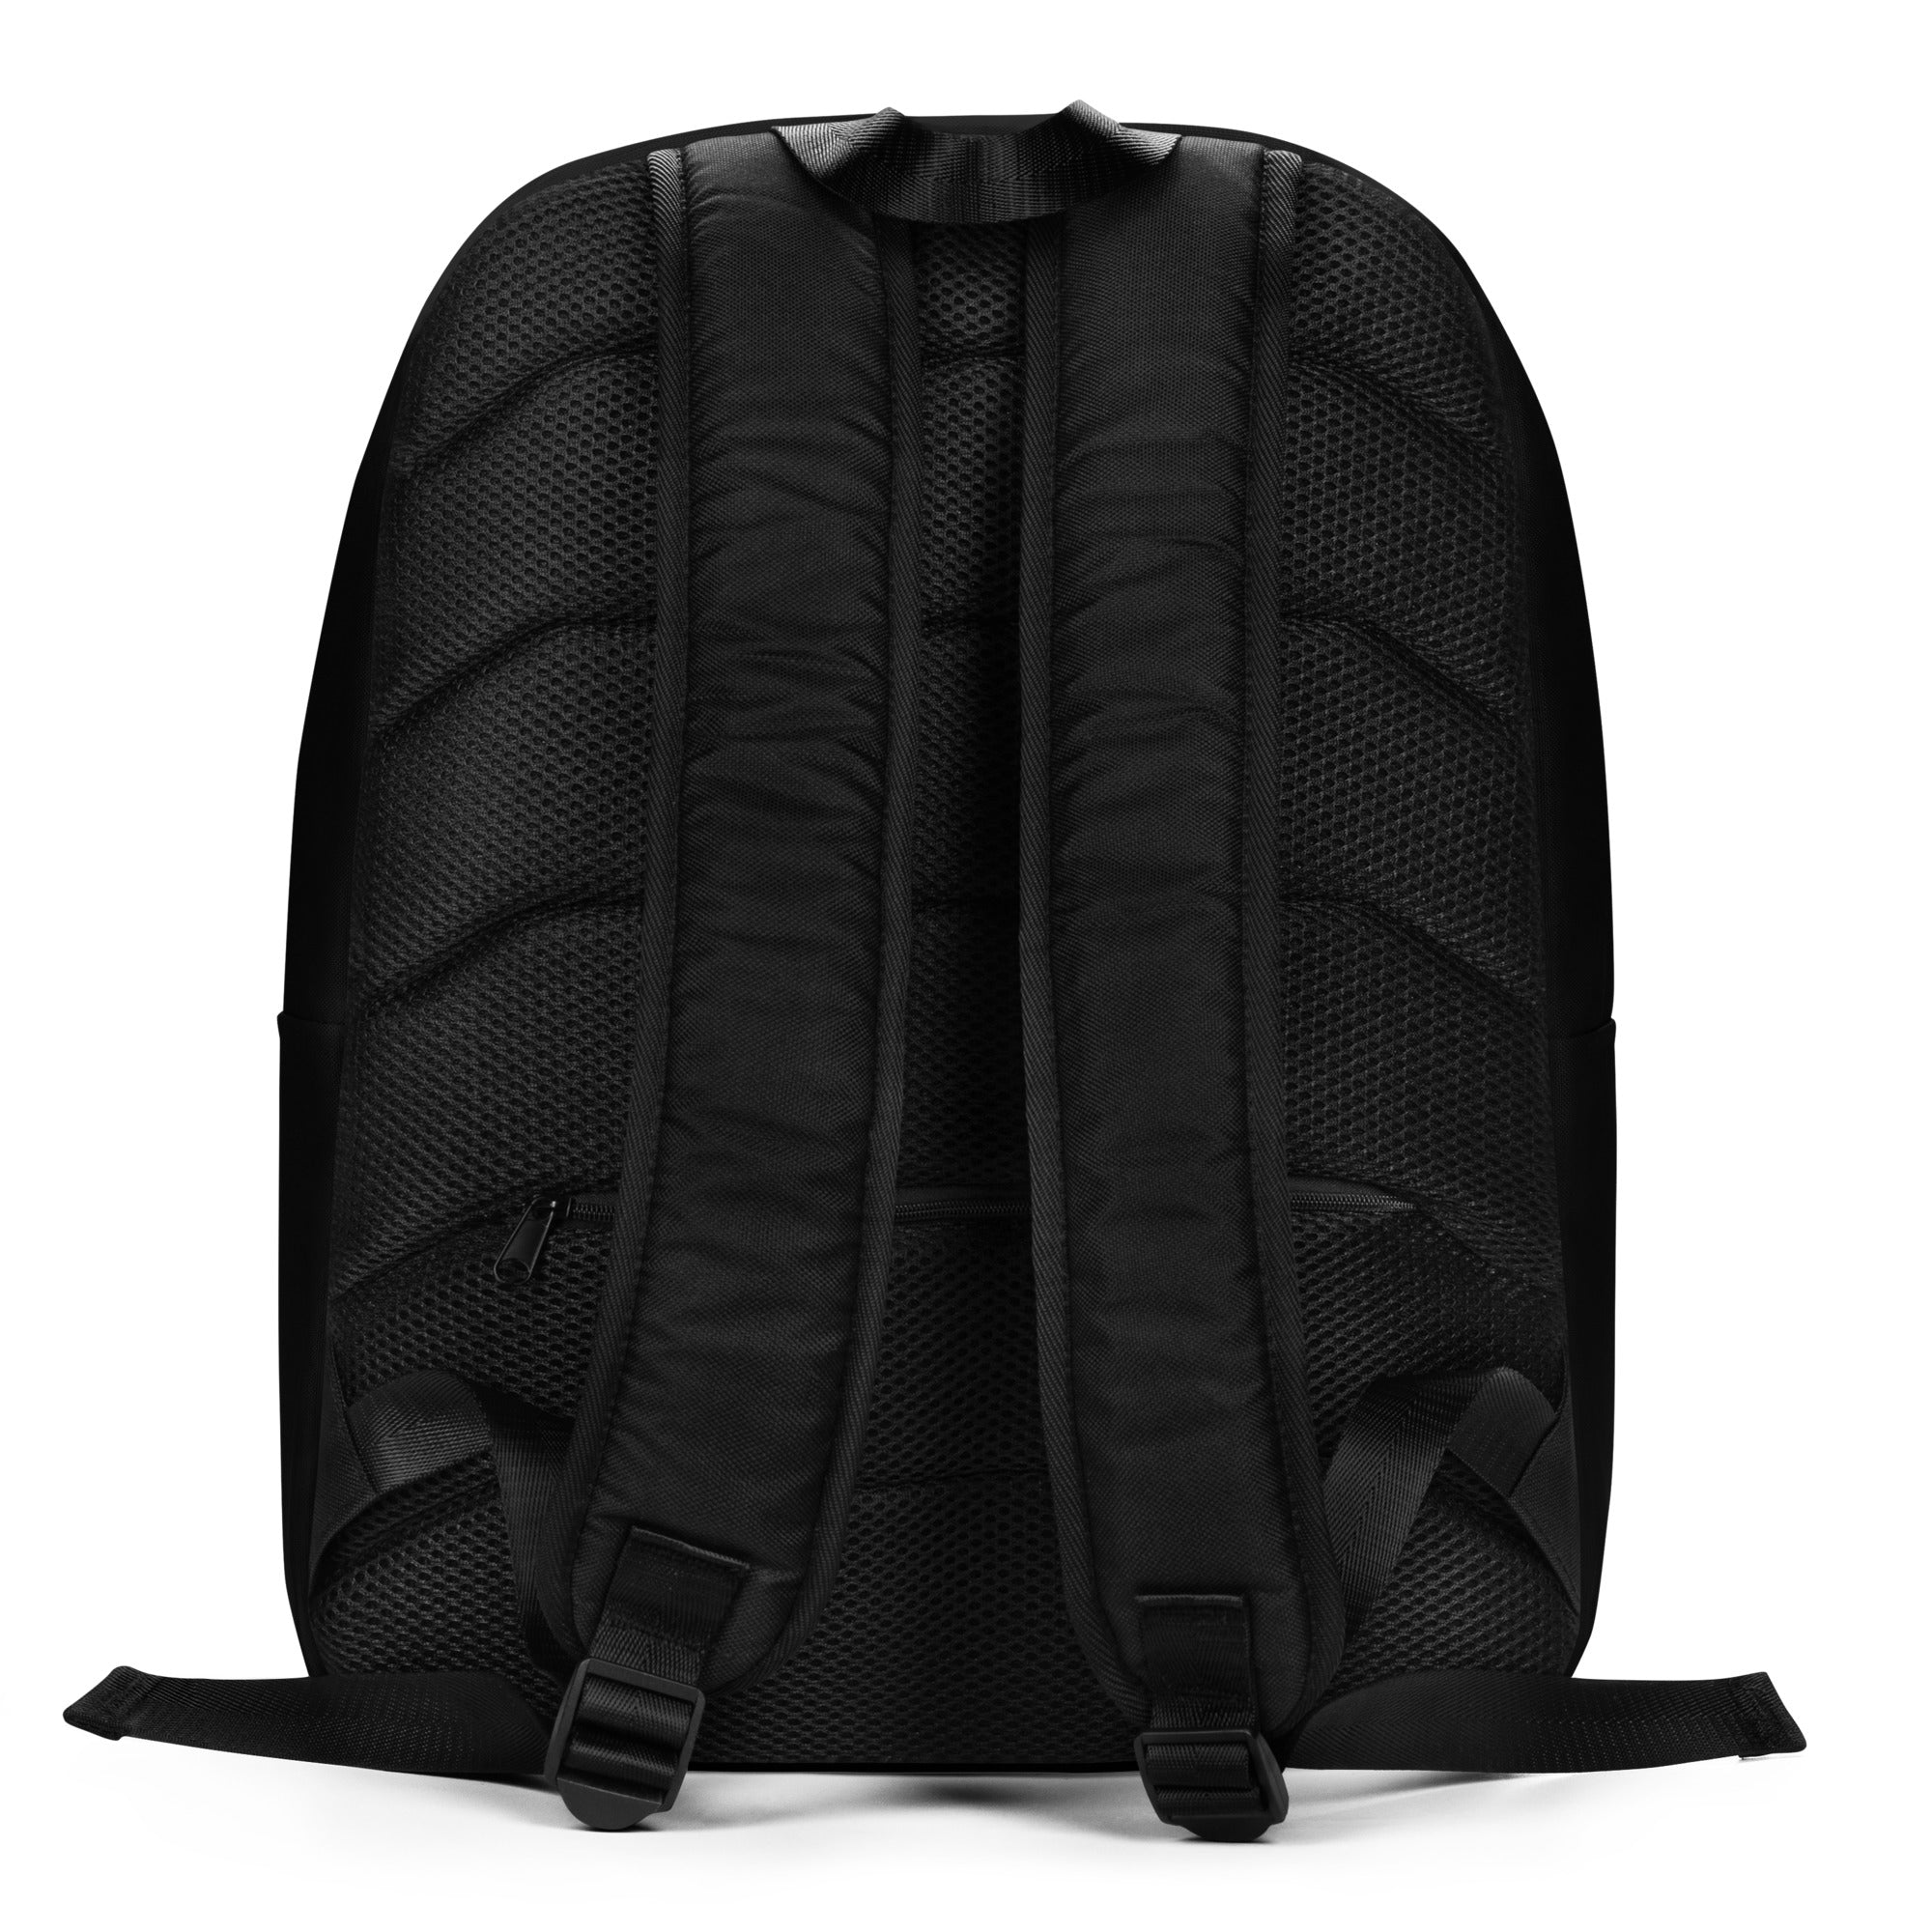 Black History Did Not Begin With Slavery Minimalist Backpack